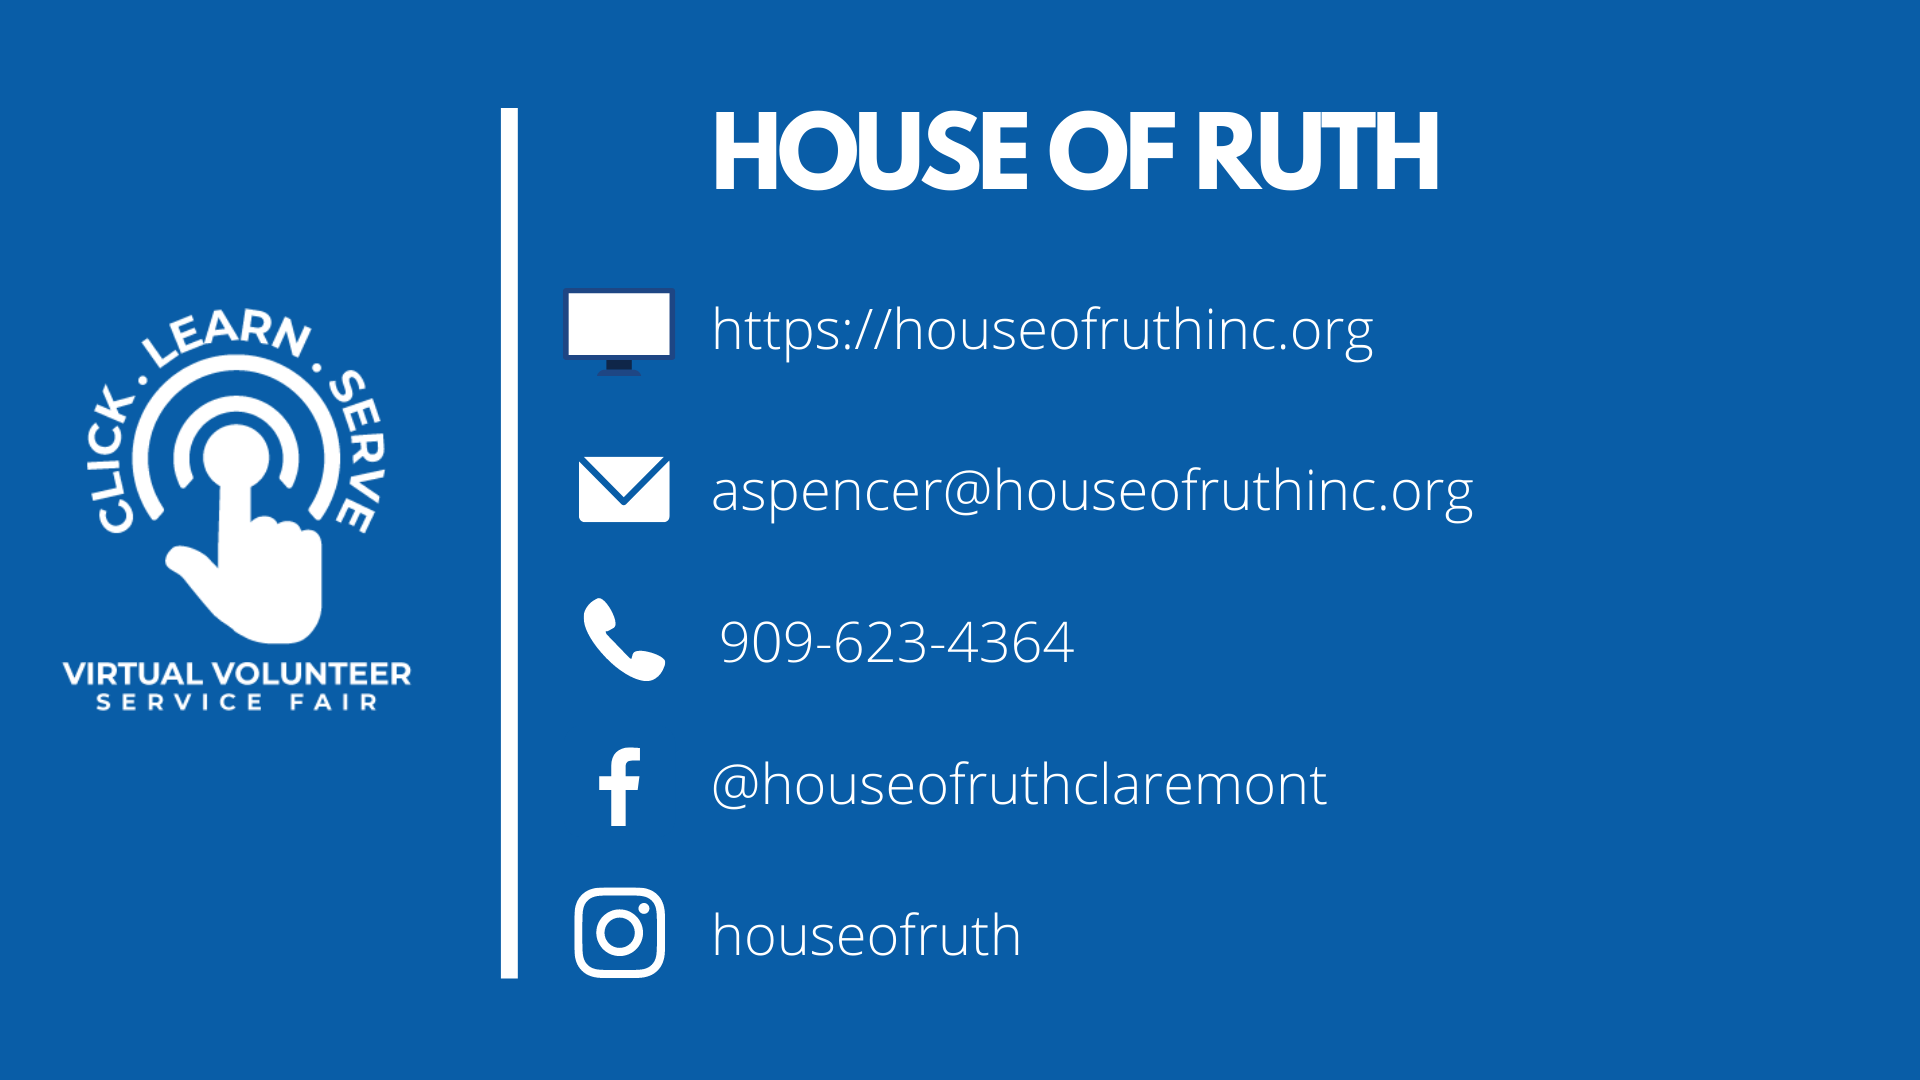 House of Ruth nonprofit video for Virtual Volunteer Service Fair.